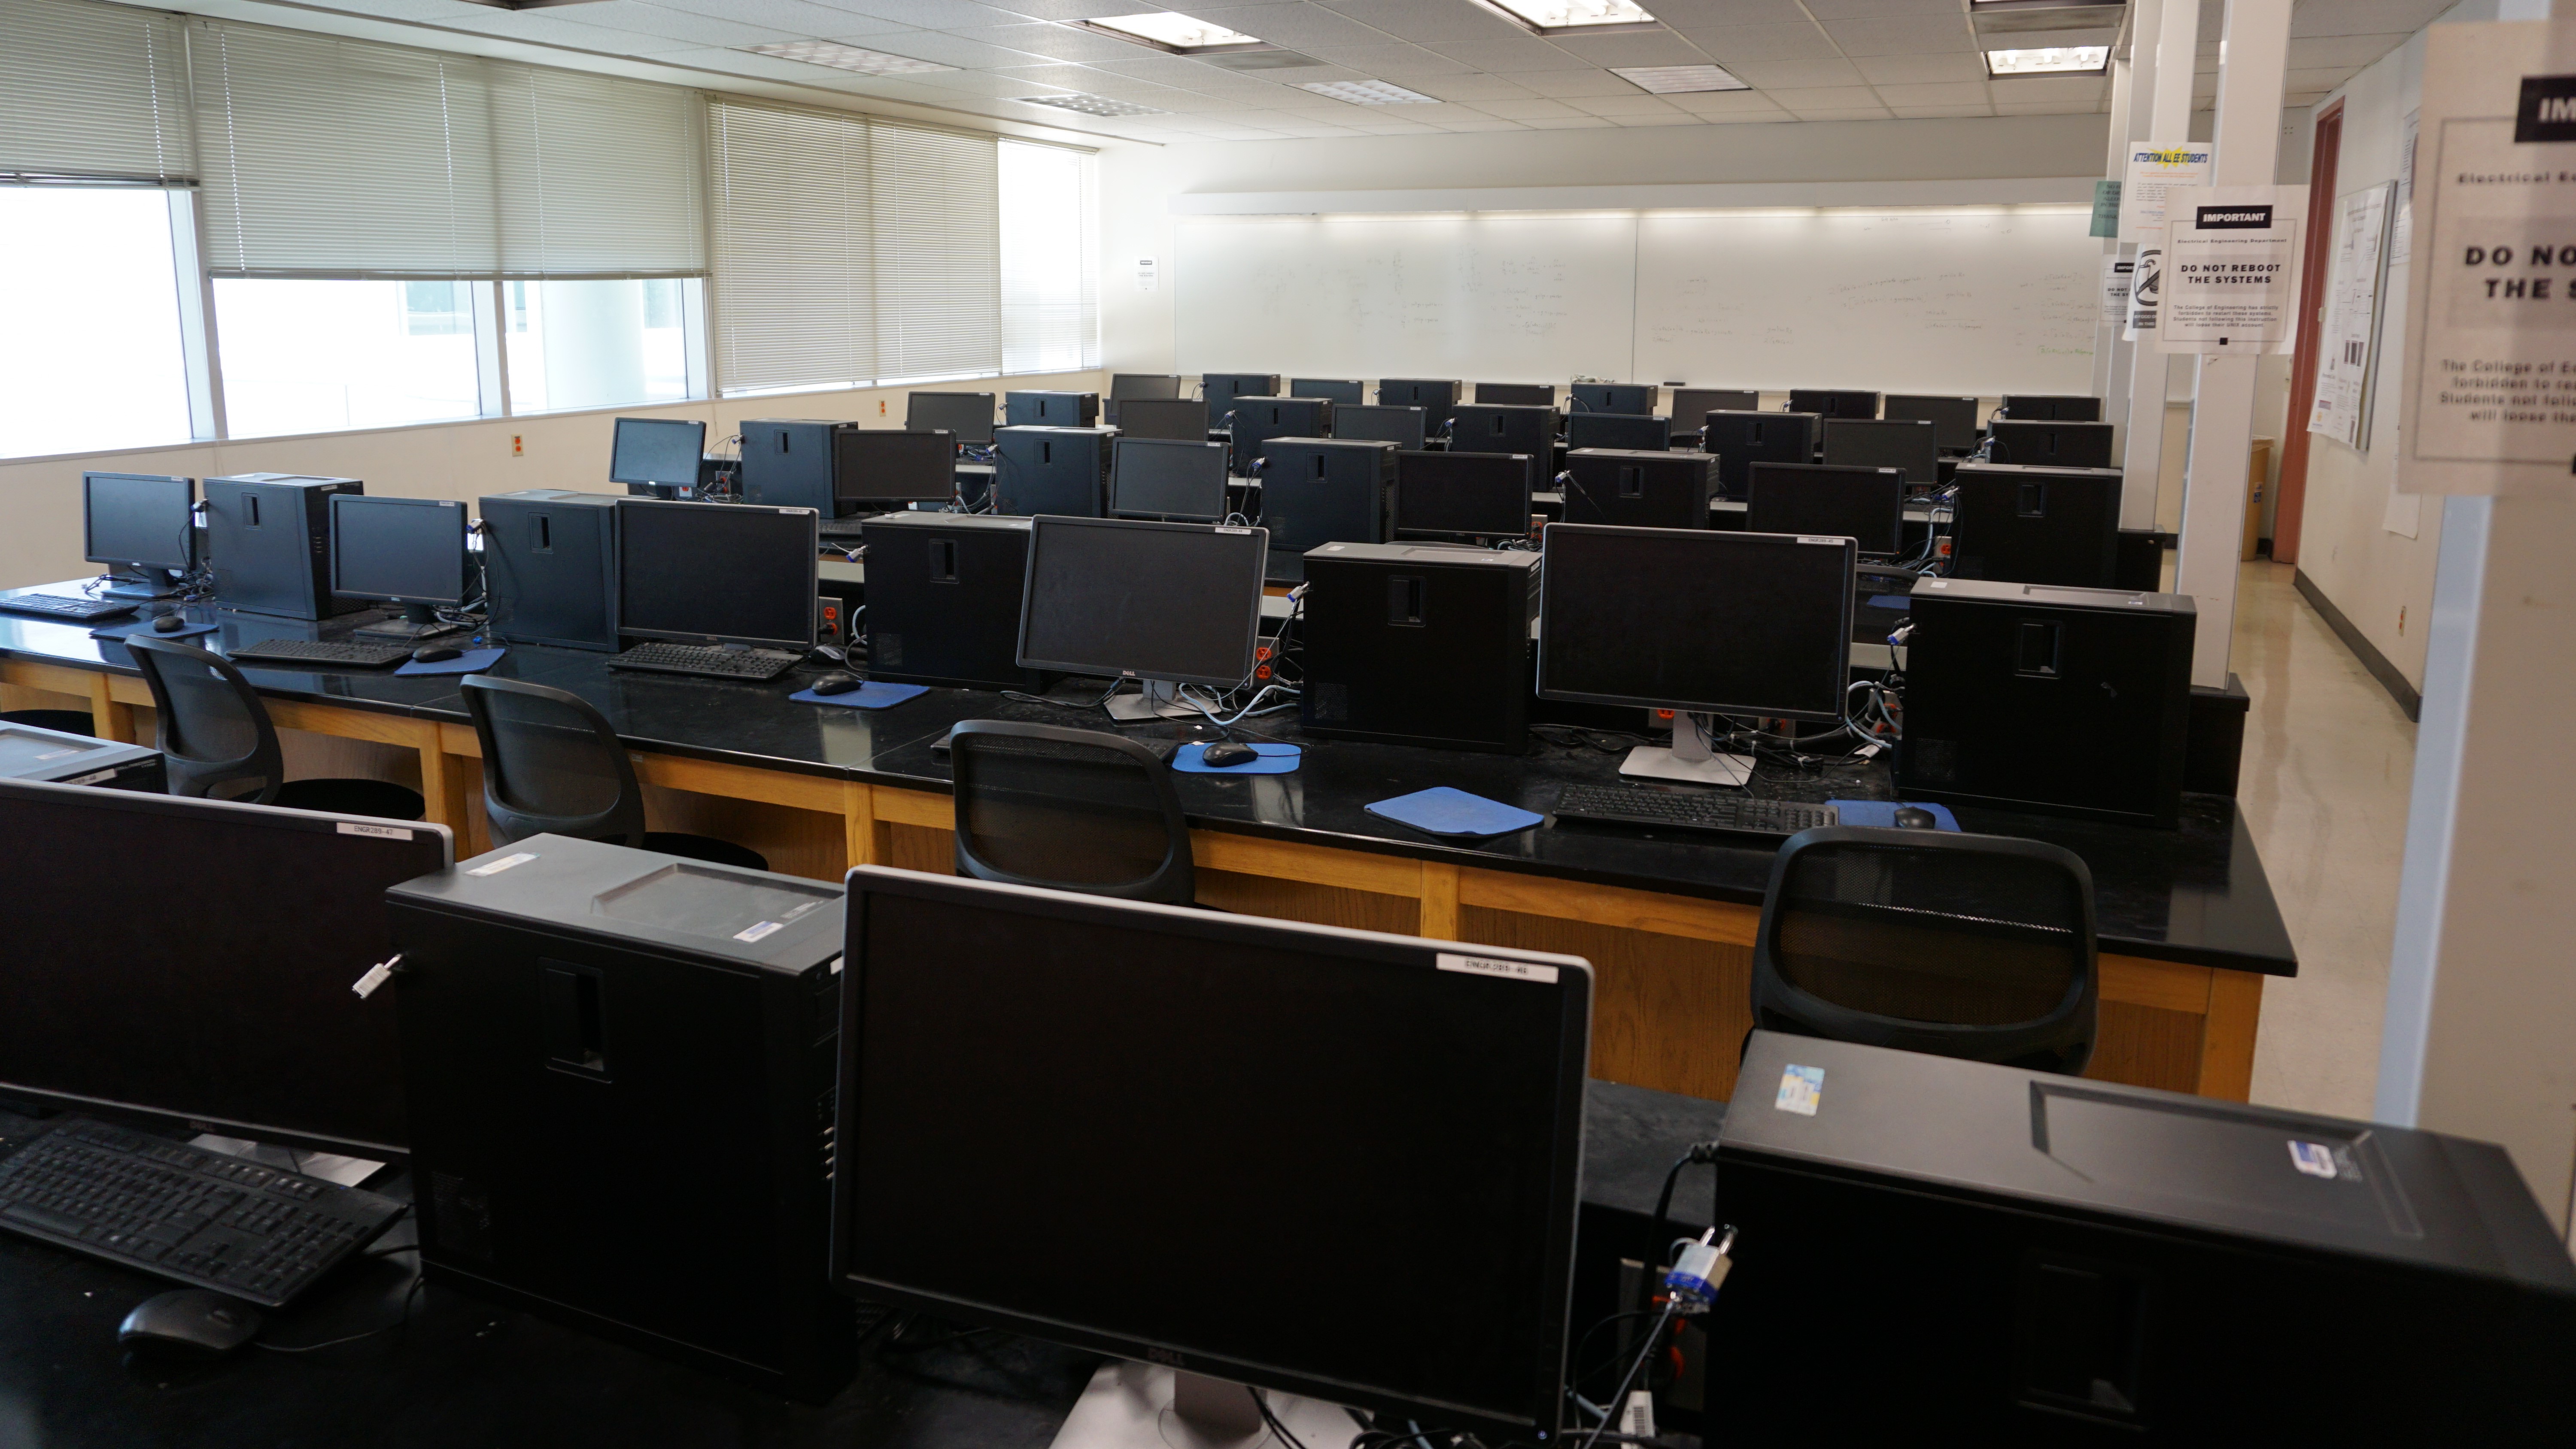 A classroom with multiple rows of computers and monitors.